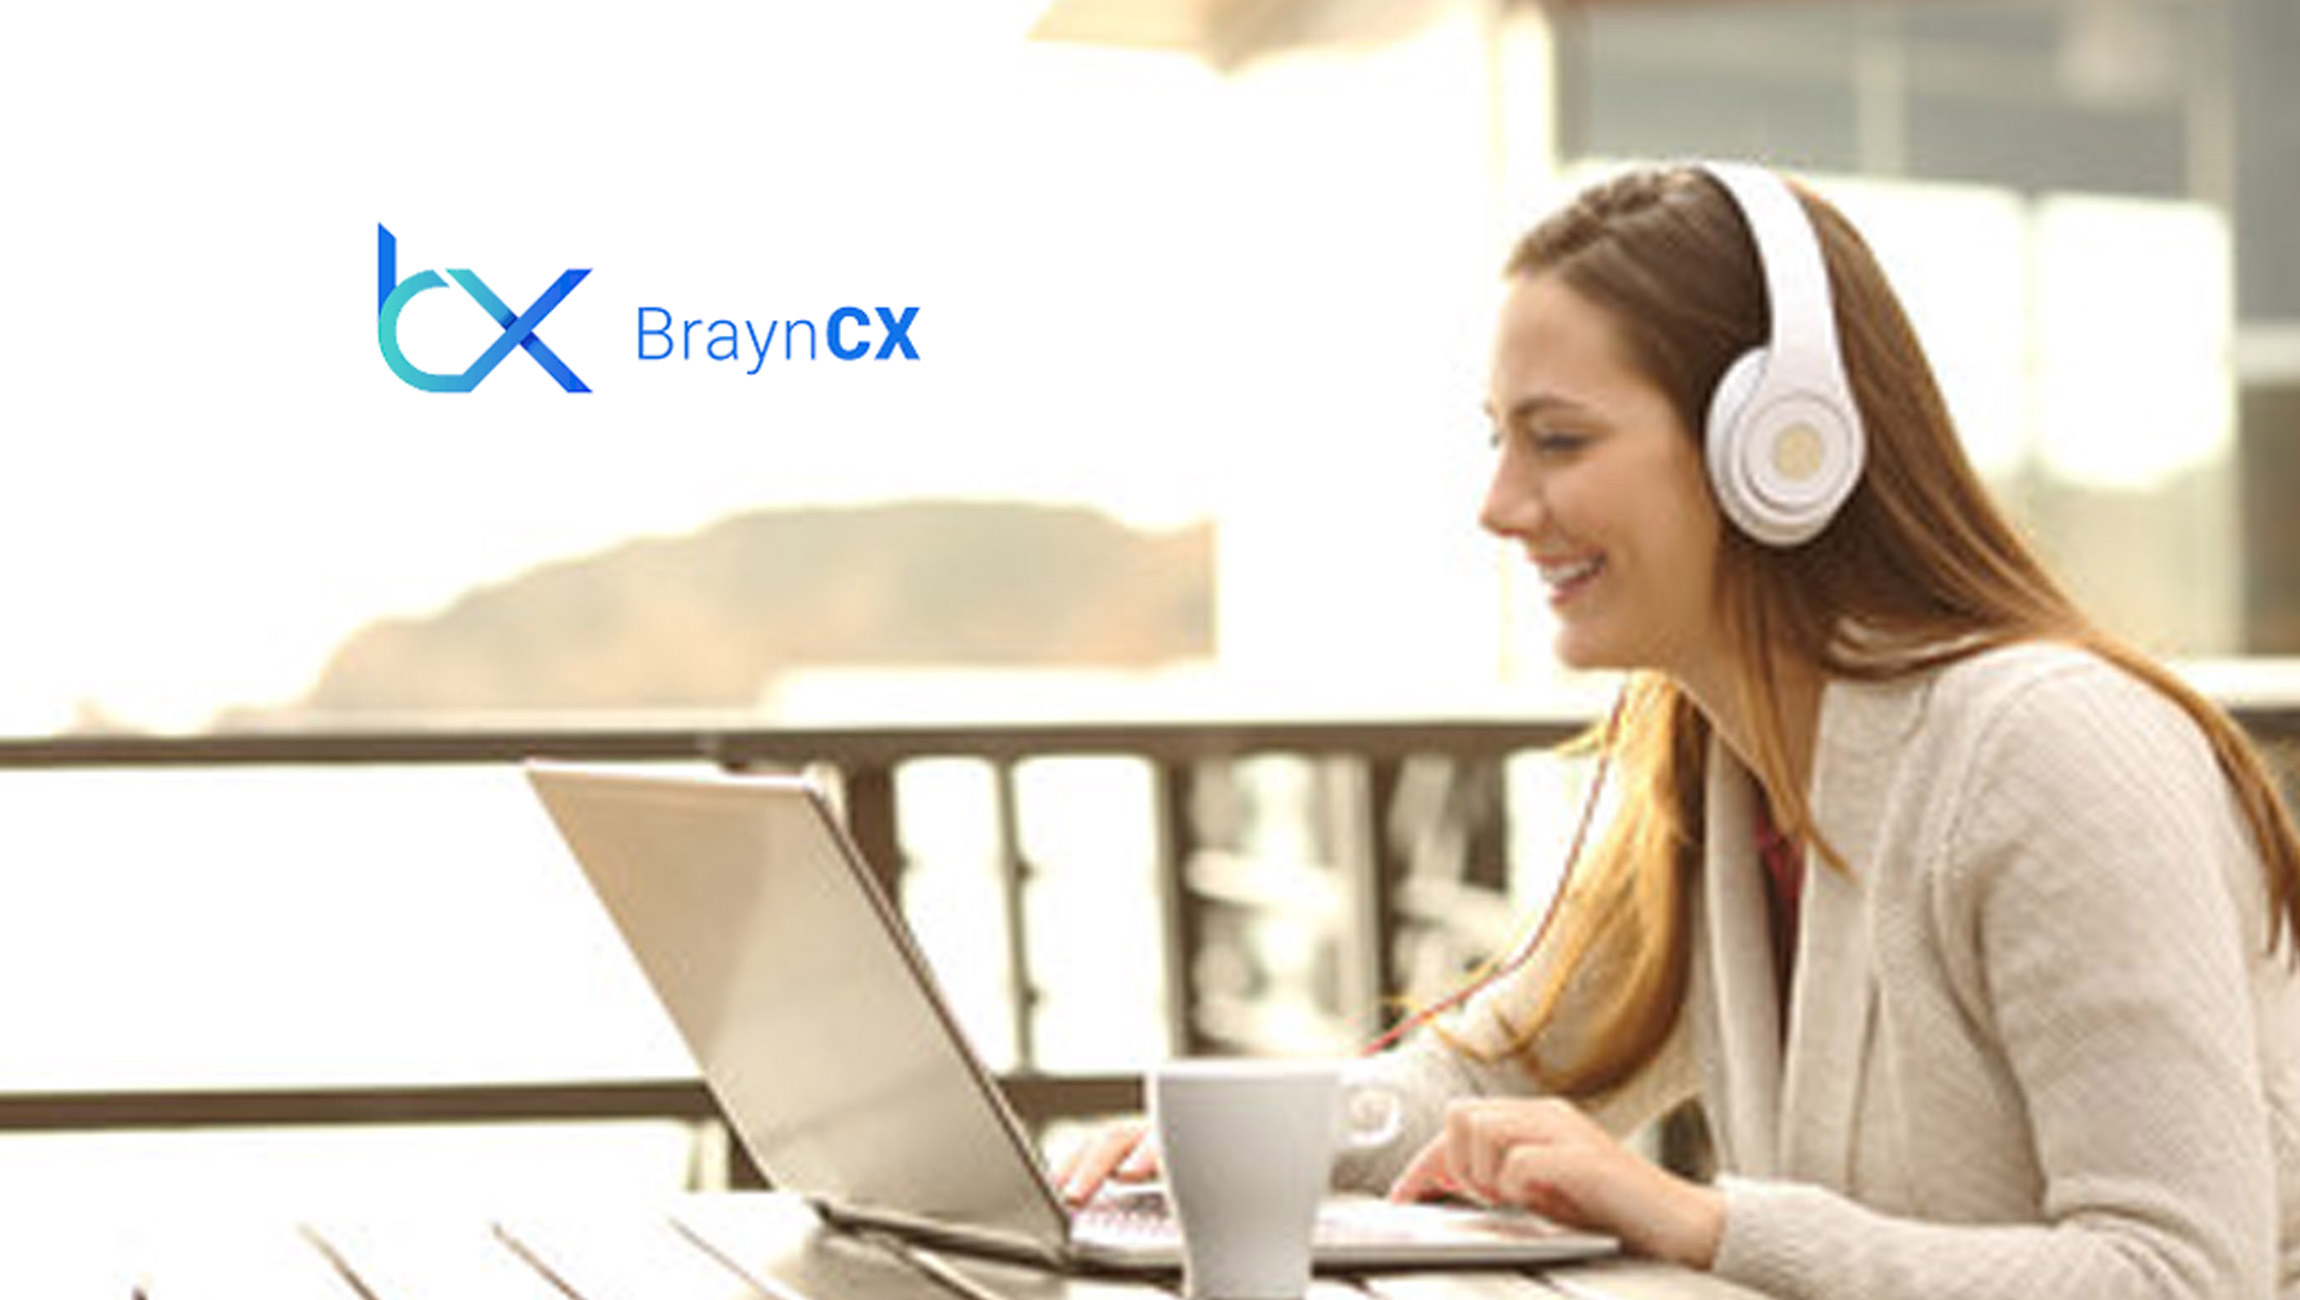 BraynCX: Transforming the Digital Experience with AI, Chat, and Concierge-Level Video Customer Service